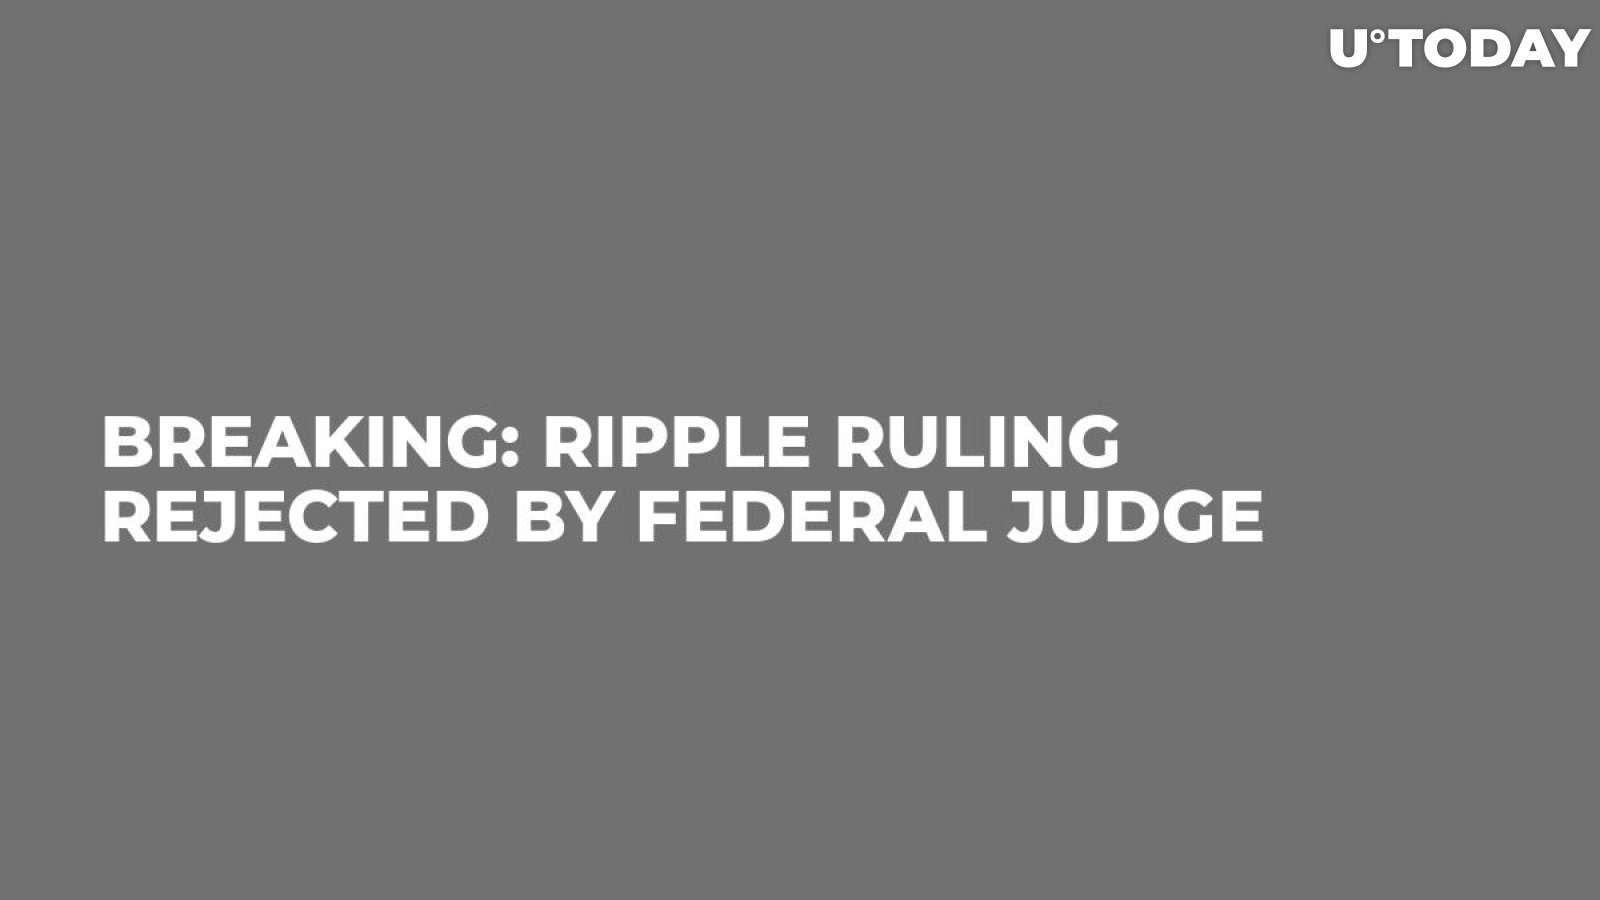 Breaking: Ripple Ruling Rejected by Federal Judge